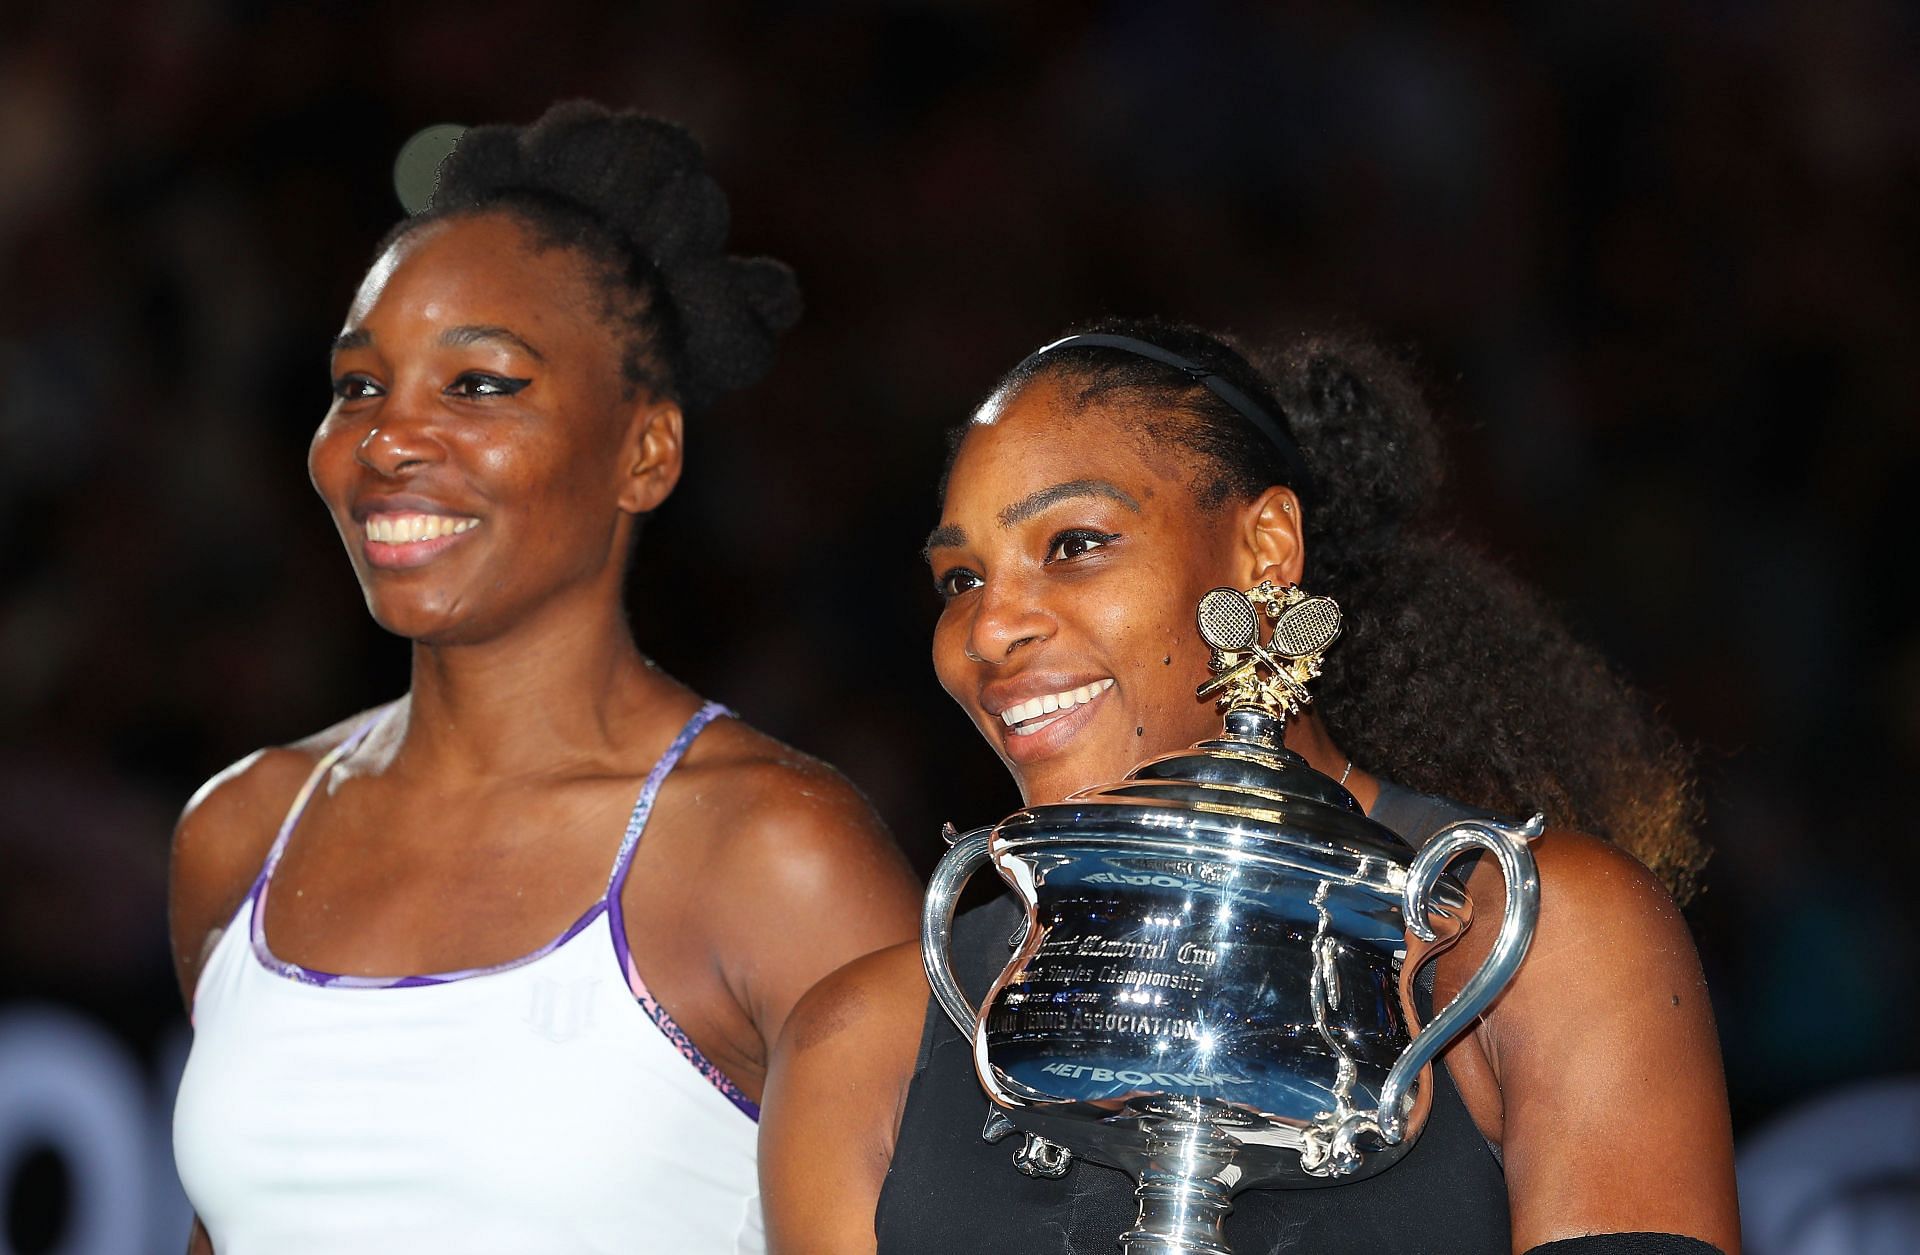 Venus Williams and Serena Williams after the pair met in the final of the 2017 Australian Open